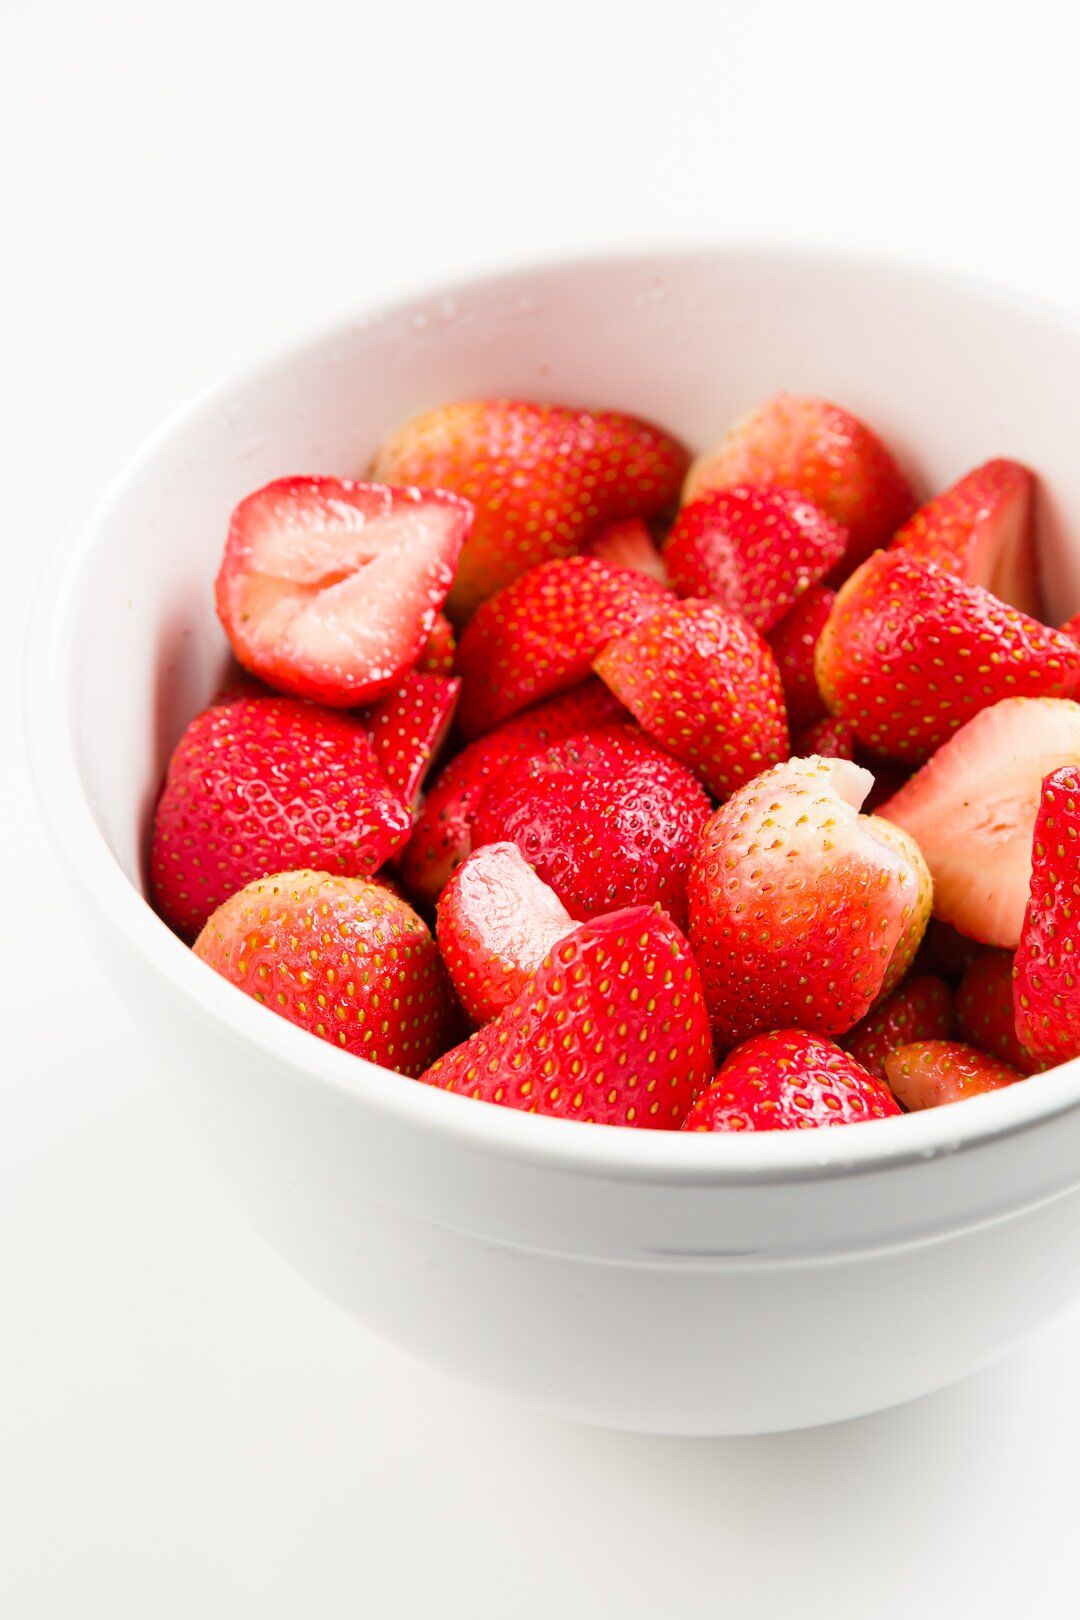 A large bowl of strawberries macerated overnight in sugar